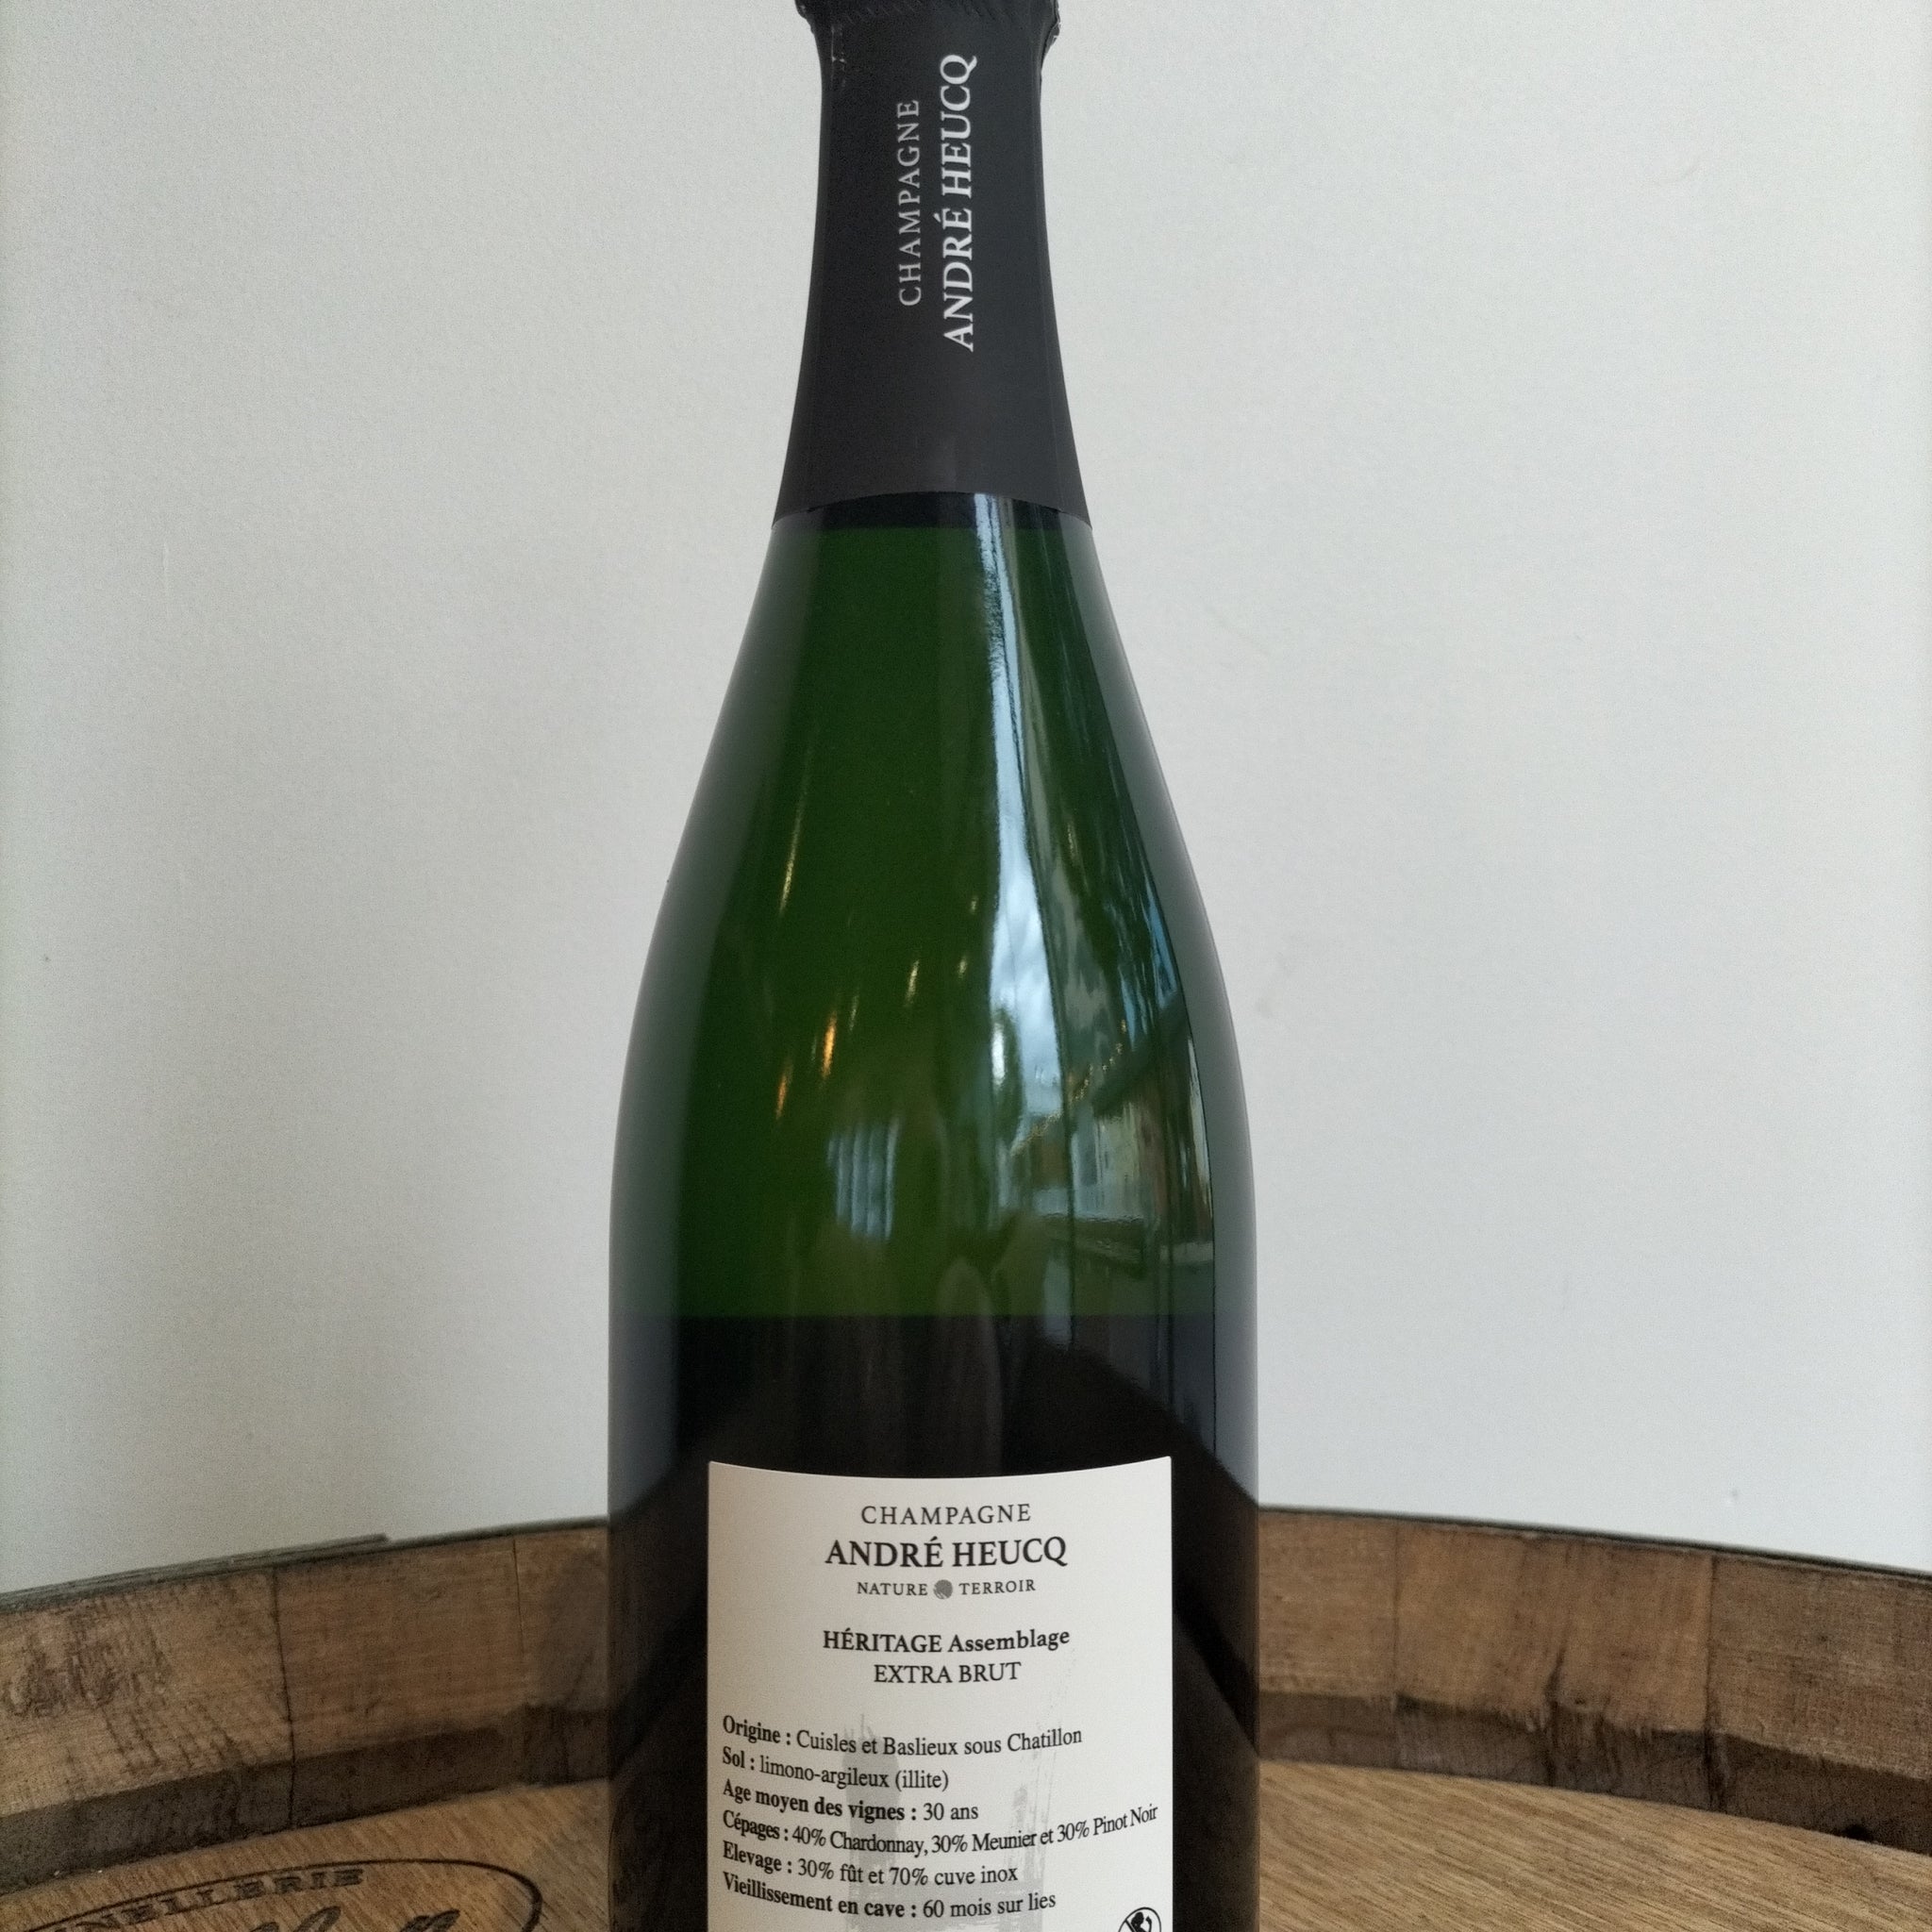 Champagne André Heucq Heritage Assemblage NV